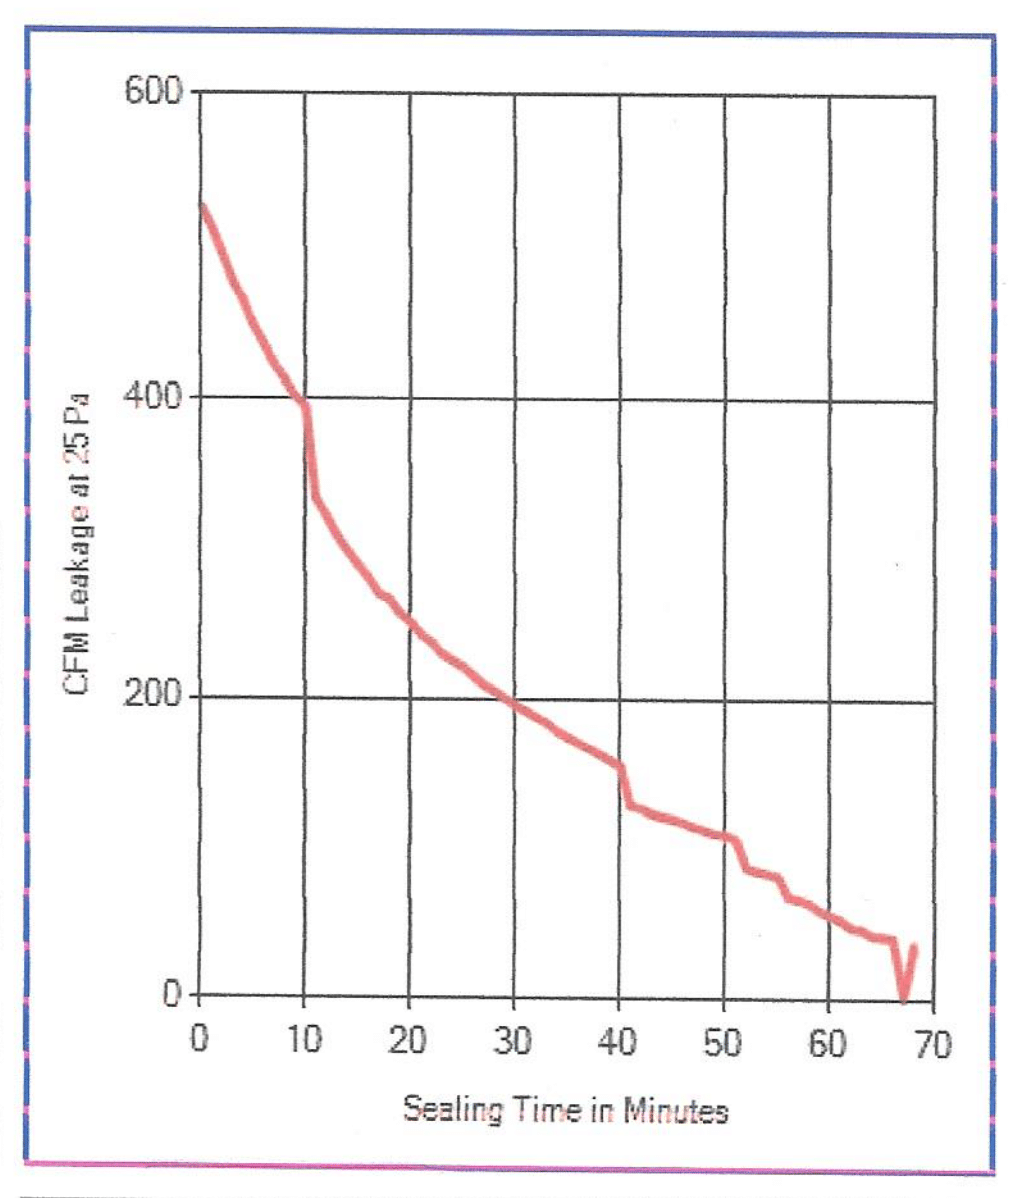 Graph of supply side air loss reduction